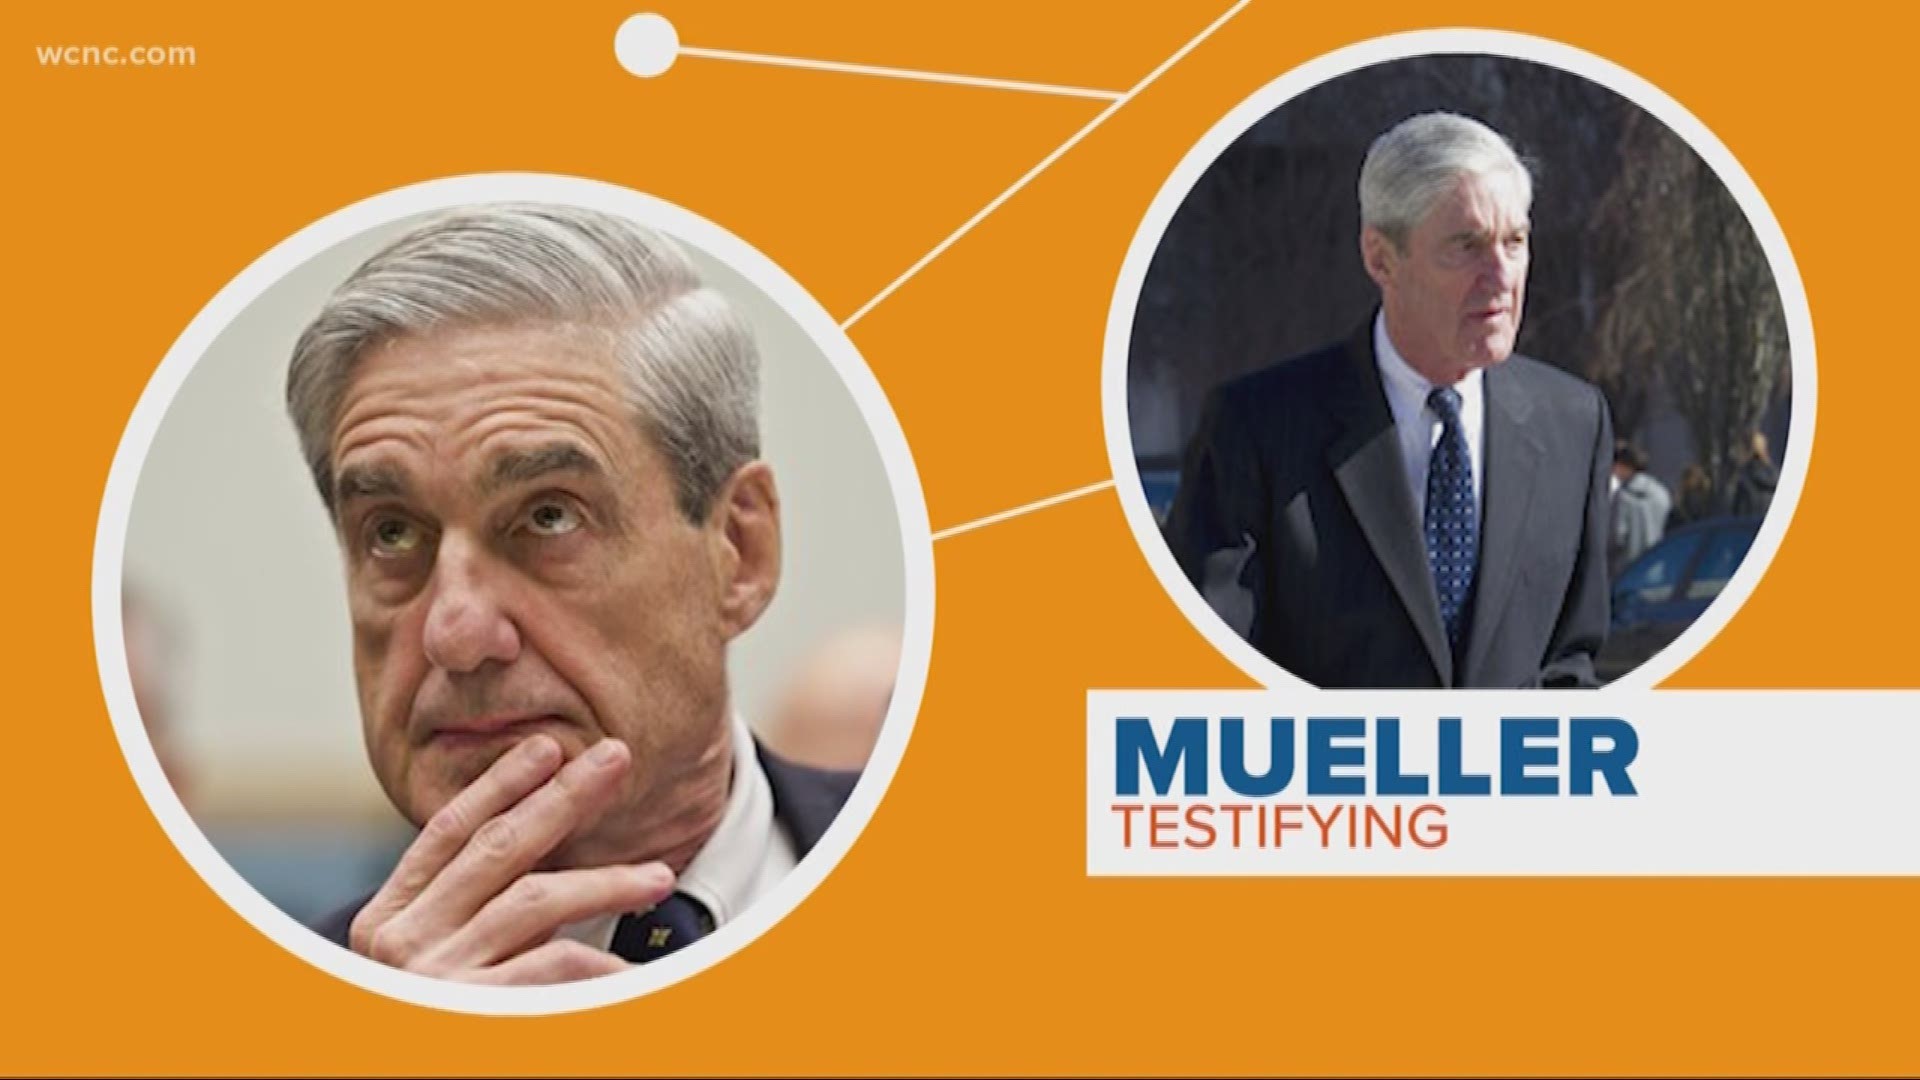 Connect the dots: Robert Mueller's highly anticipated appearance on Capitol Hill